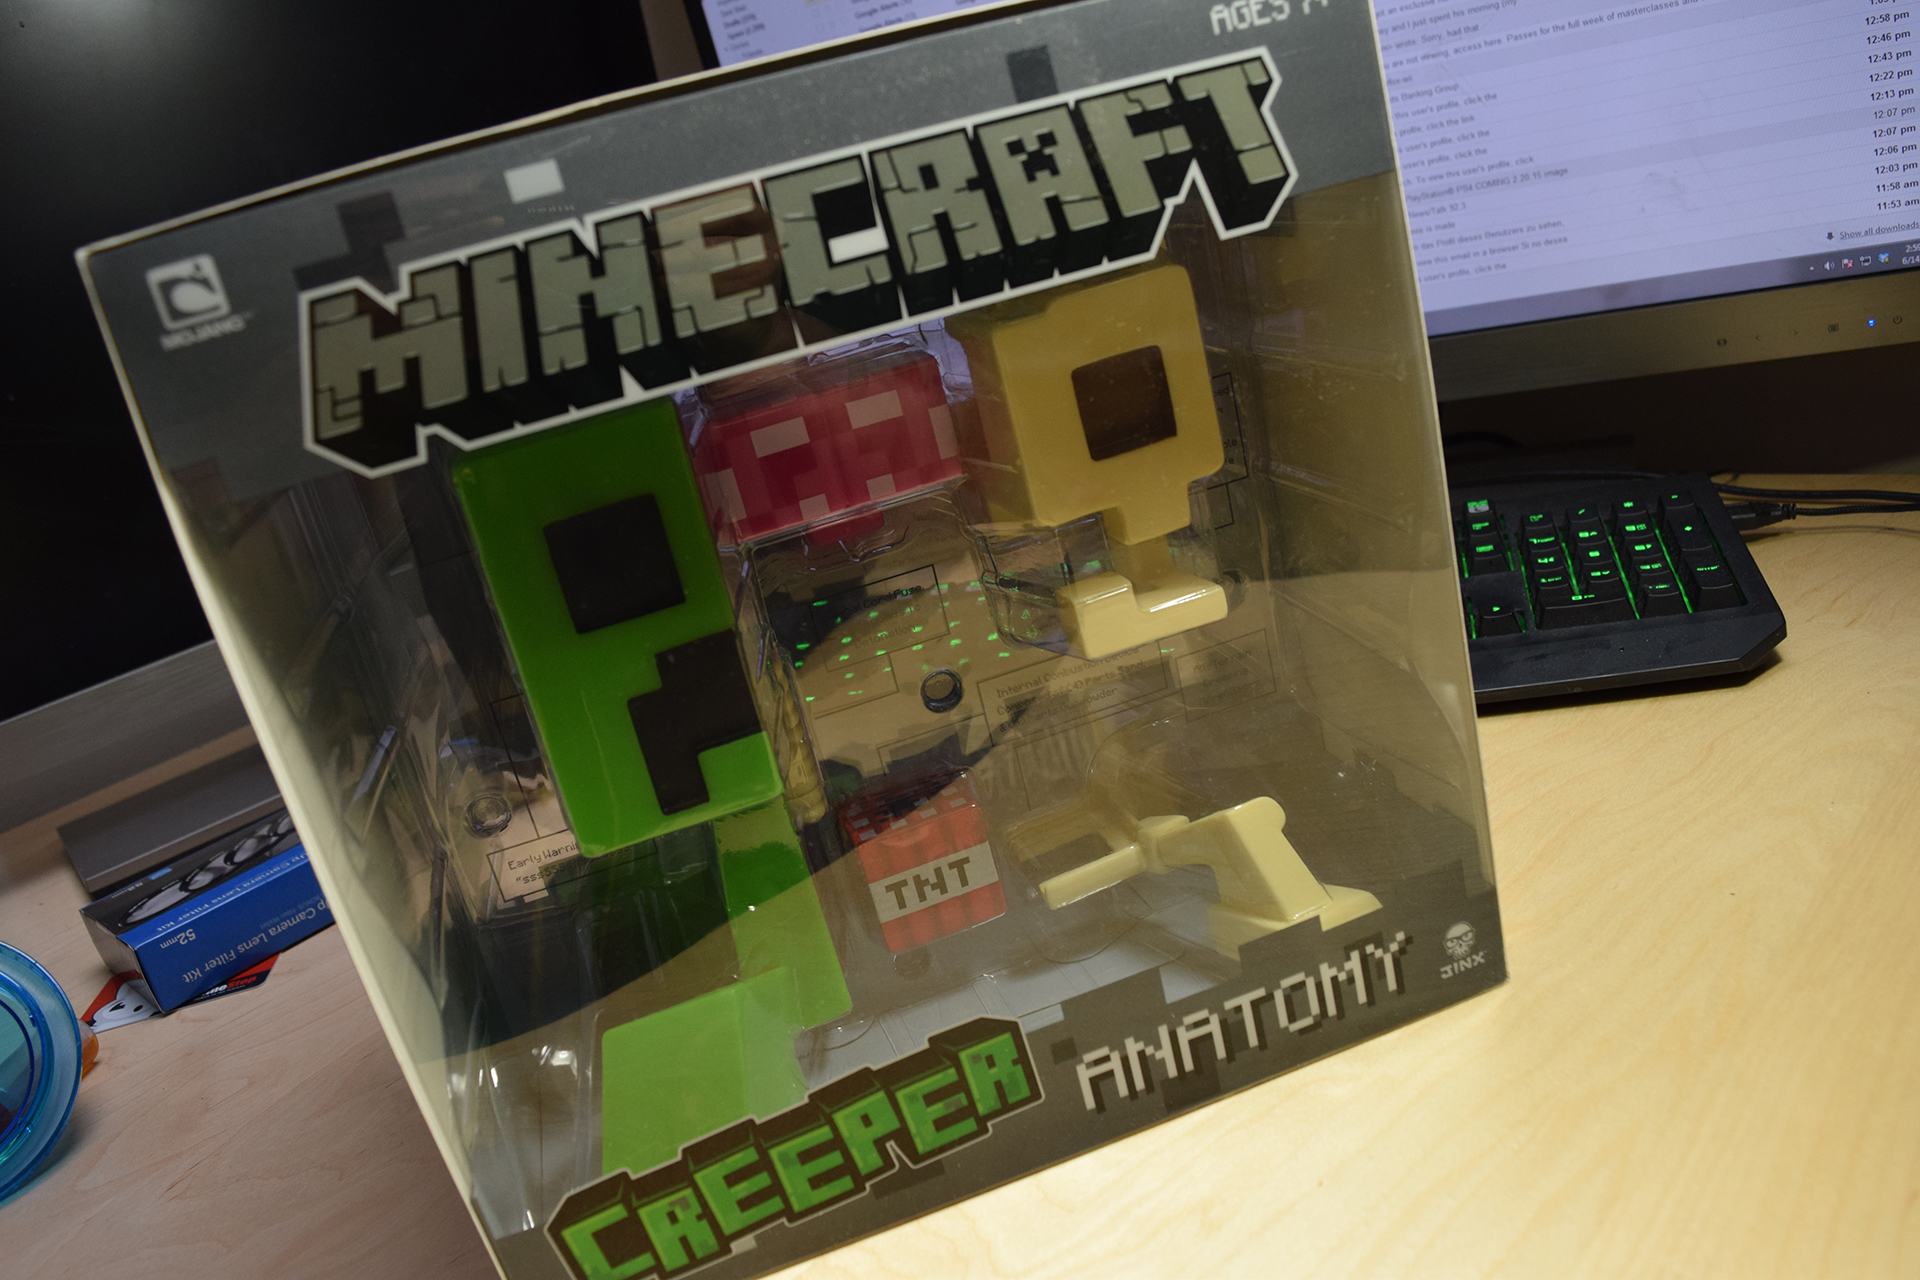 The Minecraft Creeper Anatomy Doll Answers So Many Questions